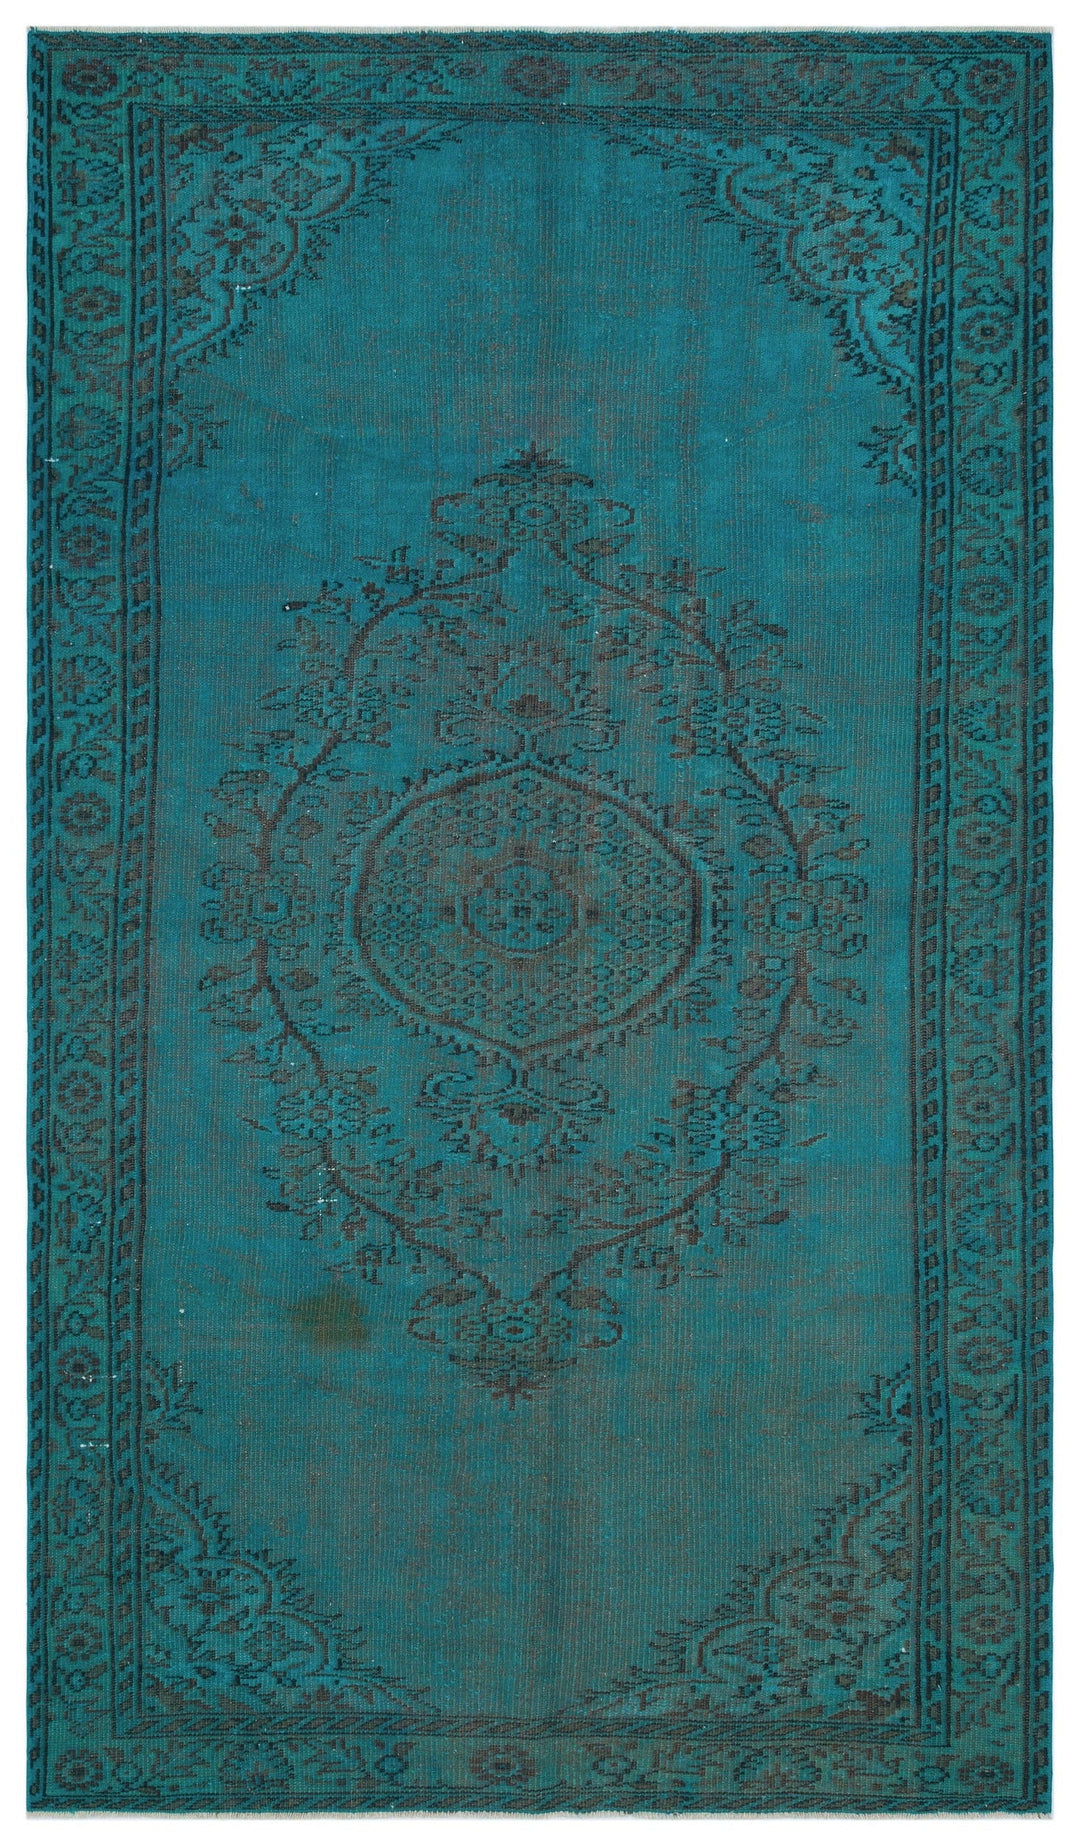 Athens Turquoise Tumbled Wool Hand Woven Carpet 157 x 275